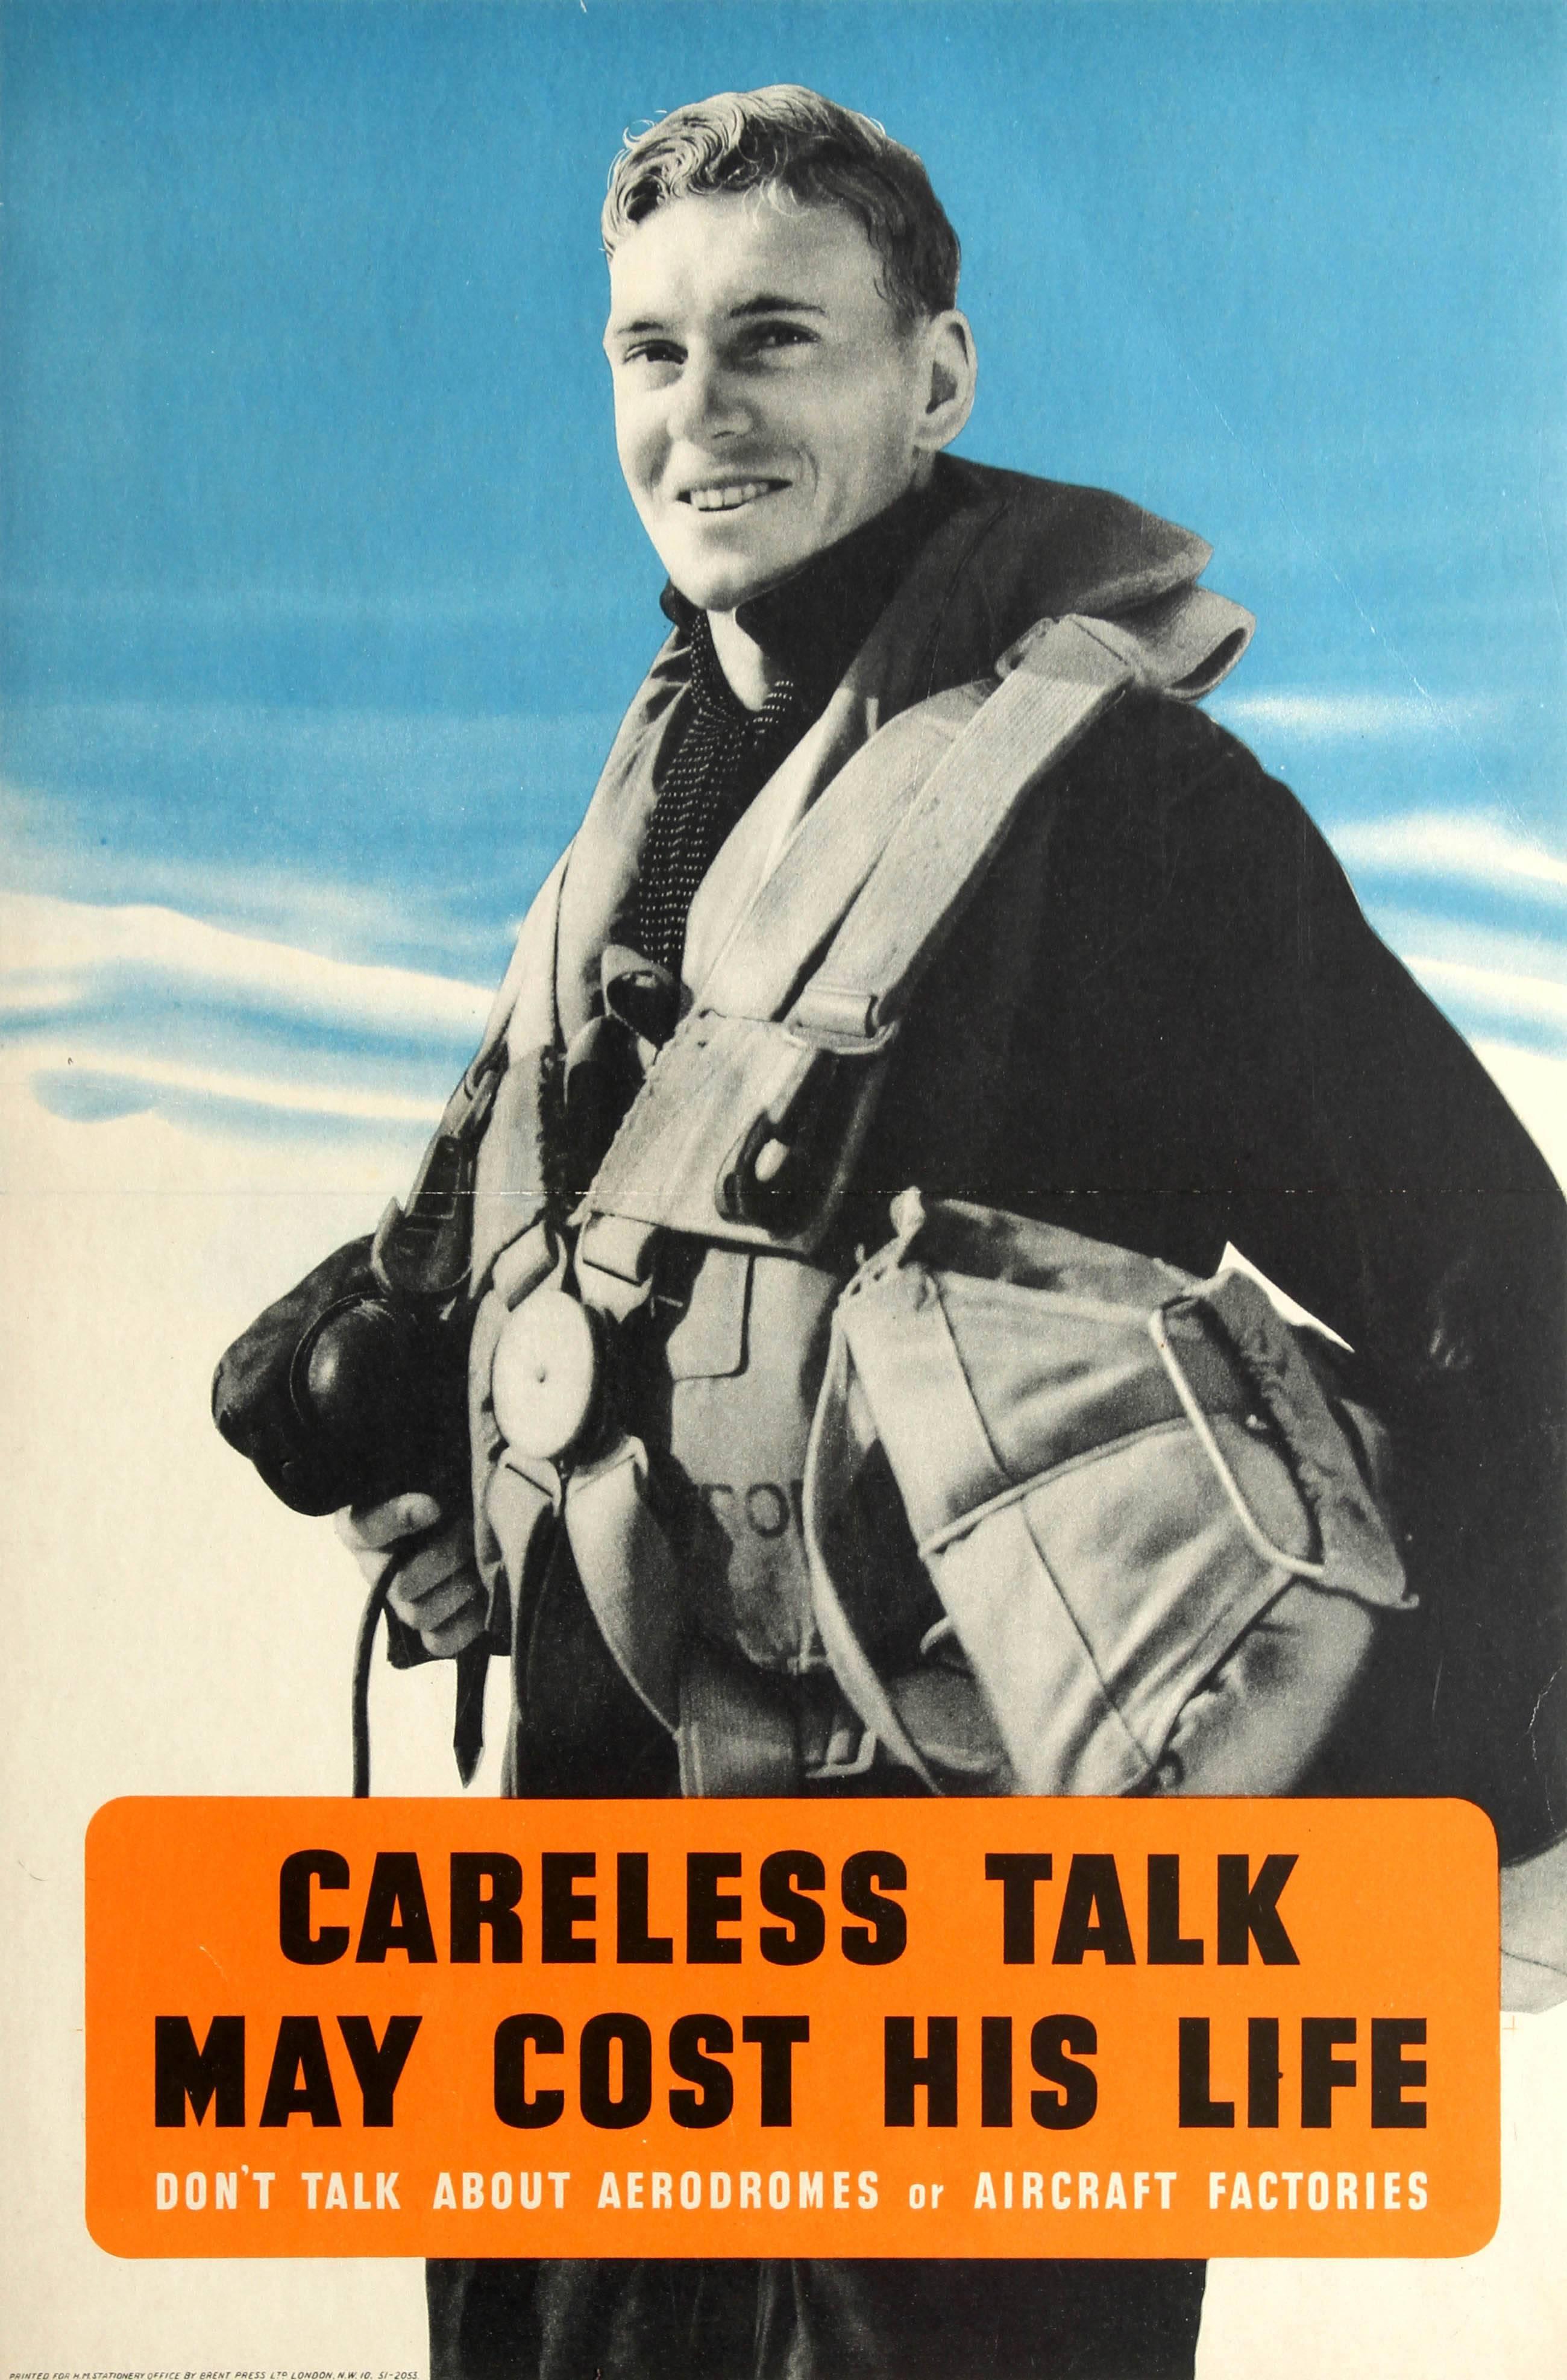 Unknown Print - Original British WWII Poster - Careless Talk May Cost His Life - Royal Air Force